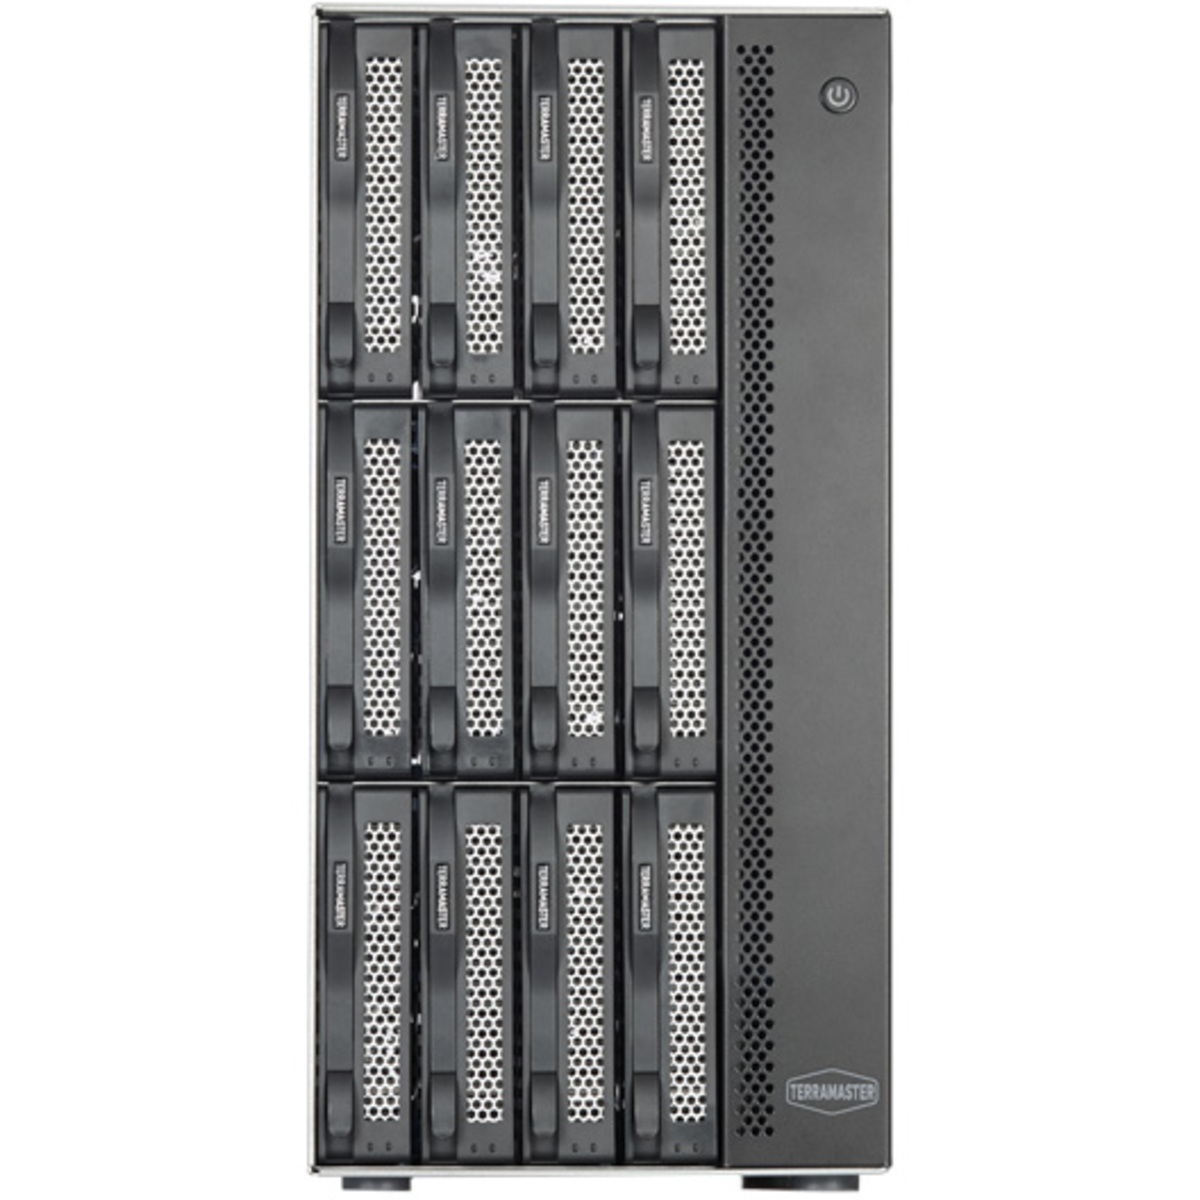 TerraMaster T12-450 192tb 12-Bay Desktop Multimedia / Power User / Business NAS - Network Attached Storage Device 8x24tb Seagate IronWolf Pro ST24000NT002 3.5 7200rpm SATA 6Gb/s HDD NAS Class Drives Installed - Burn-In Tested T12-450